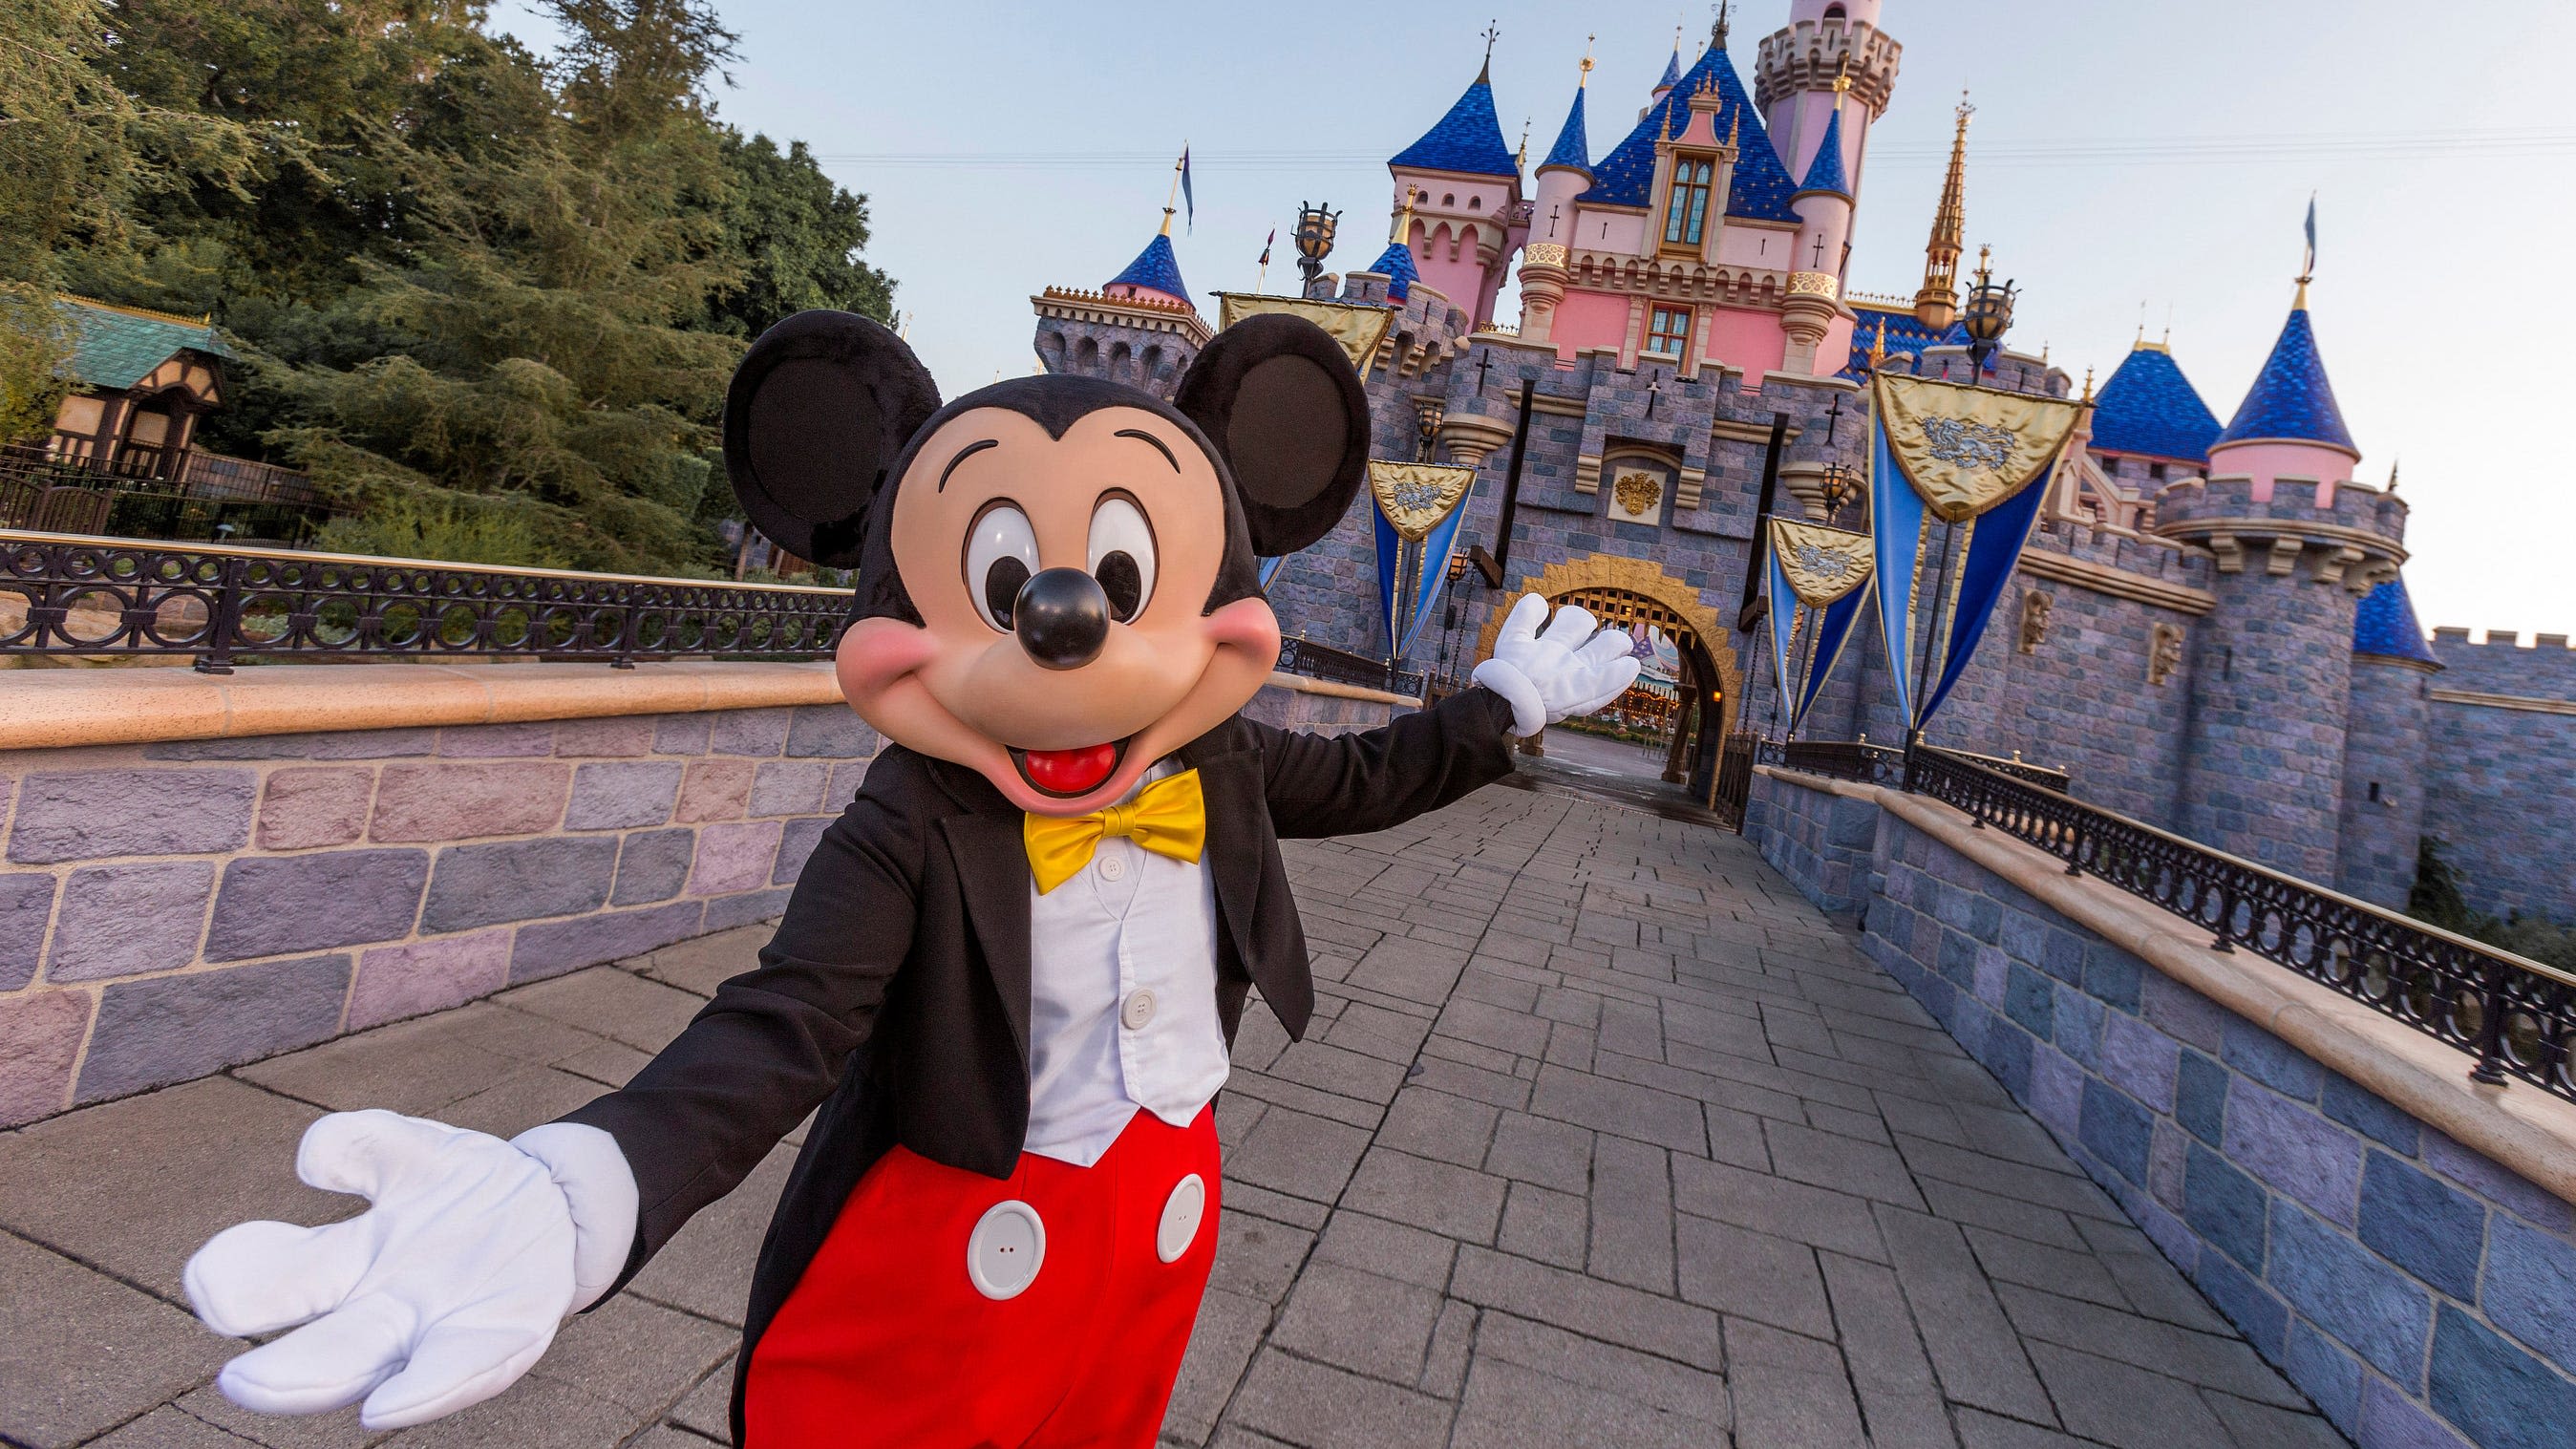 Disneyland's $2 billion reno: Here's what new rides and lands may be coming